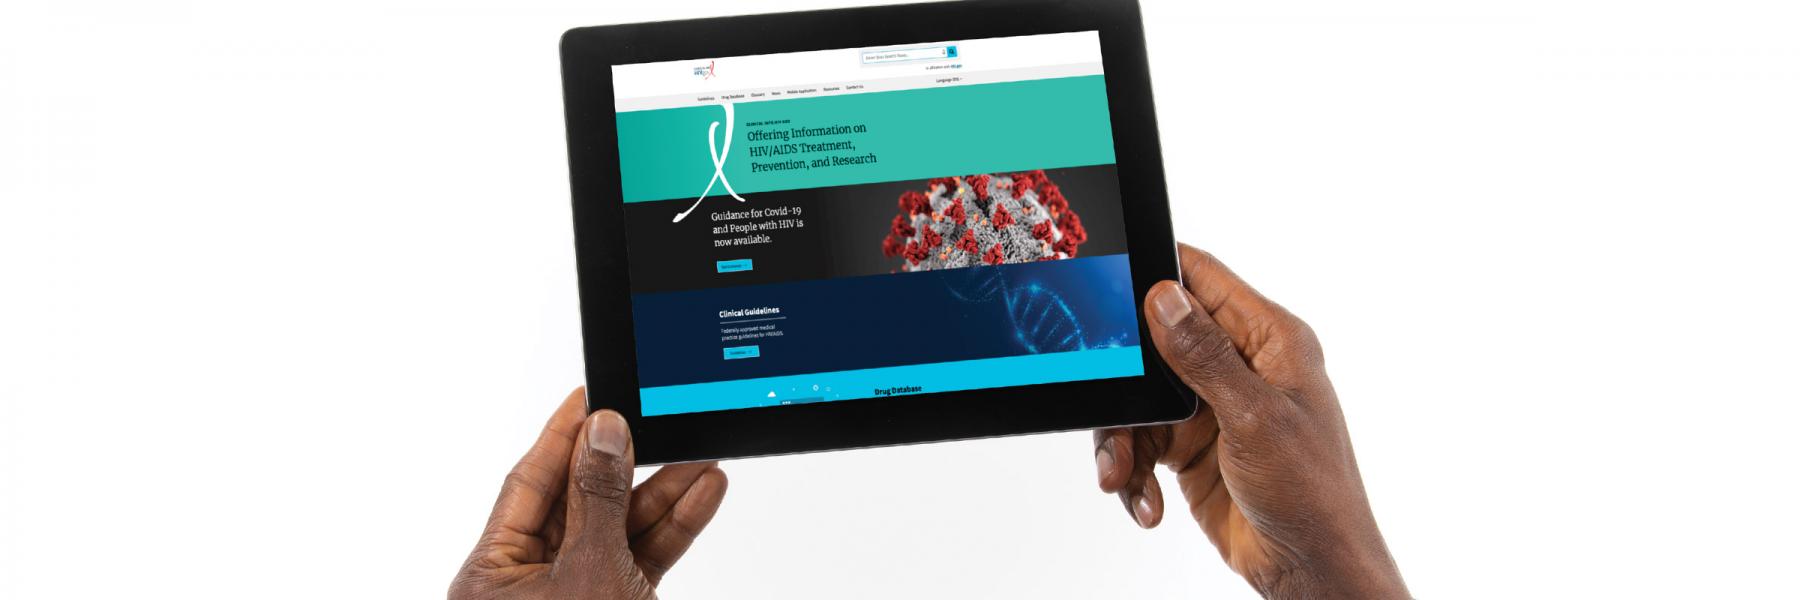 The web page of the DHHS HIV treatment guidelines appears on a tablet device being held by  hands